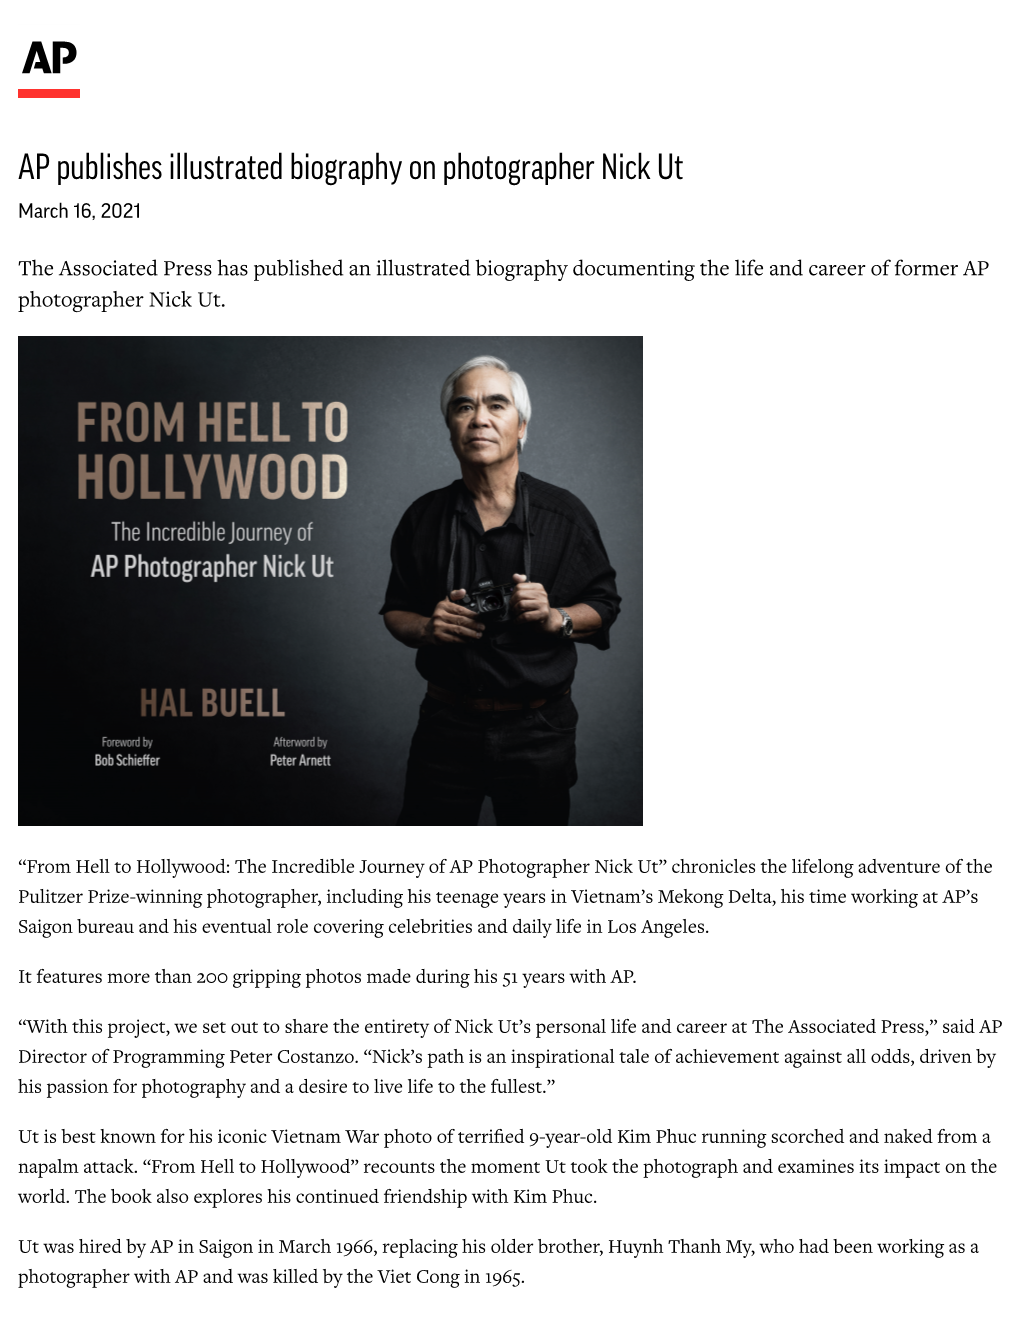 AP Publishes Illustrated Biography on Photographer Nick Ut March 16, 2021